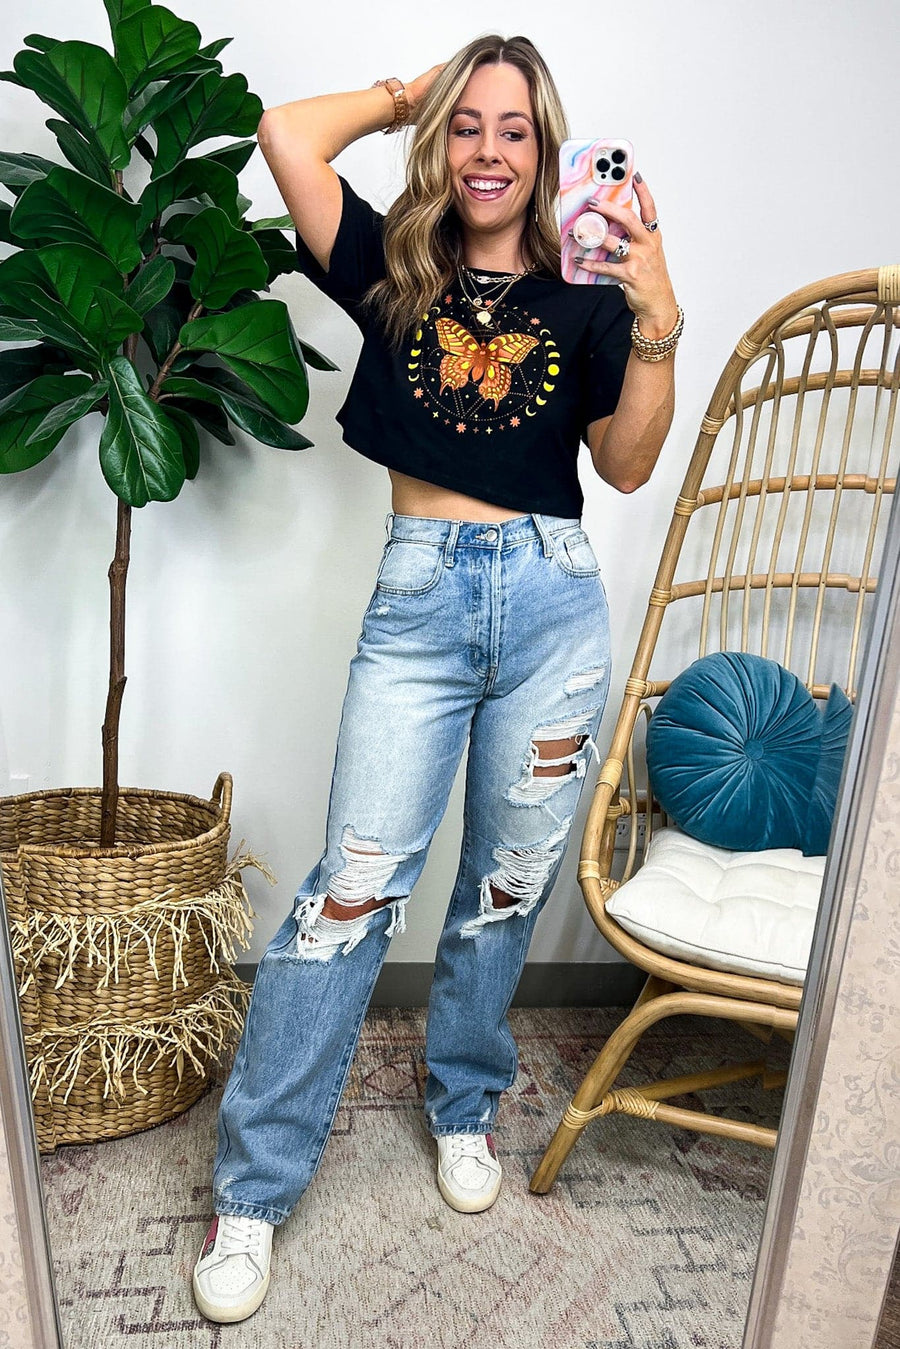  Butterfly Sun and Moon Graphic Cropped Tee - FINAL SALE - kitchencabinetmagic